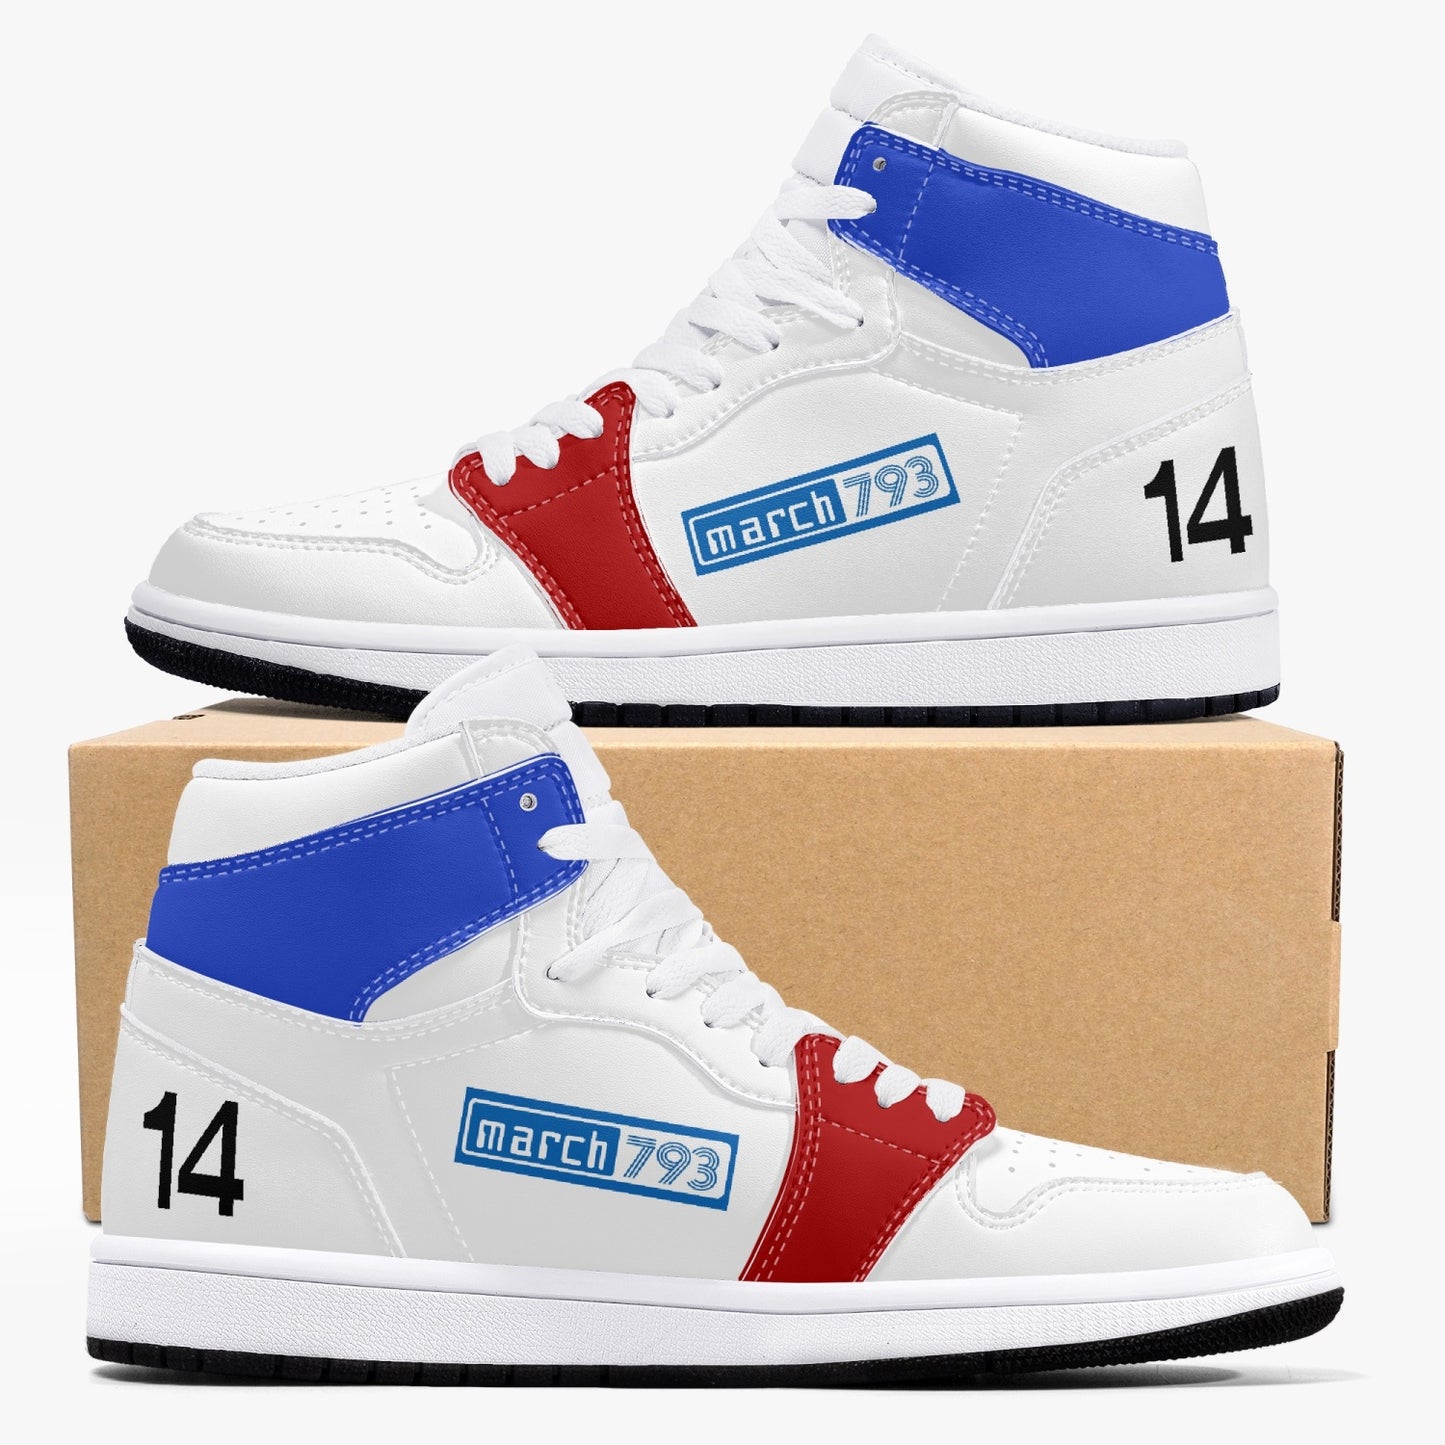 Steve Willing F2 MARCH High-Top Leather Sneakers - blue band